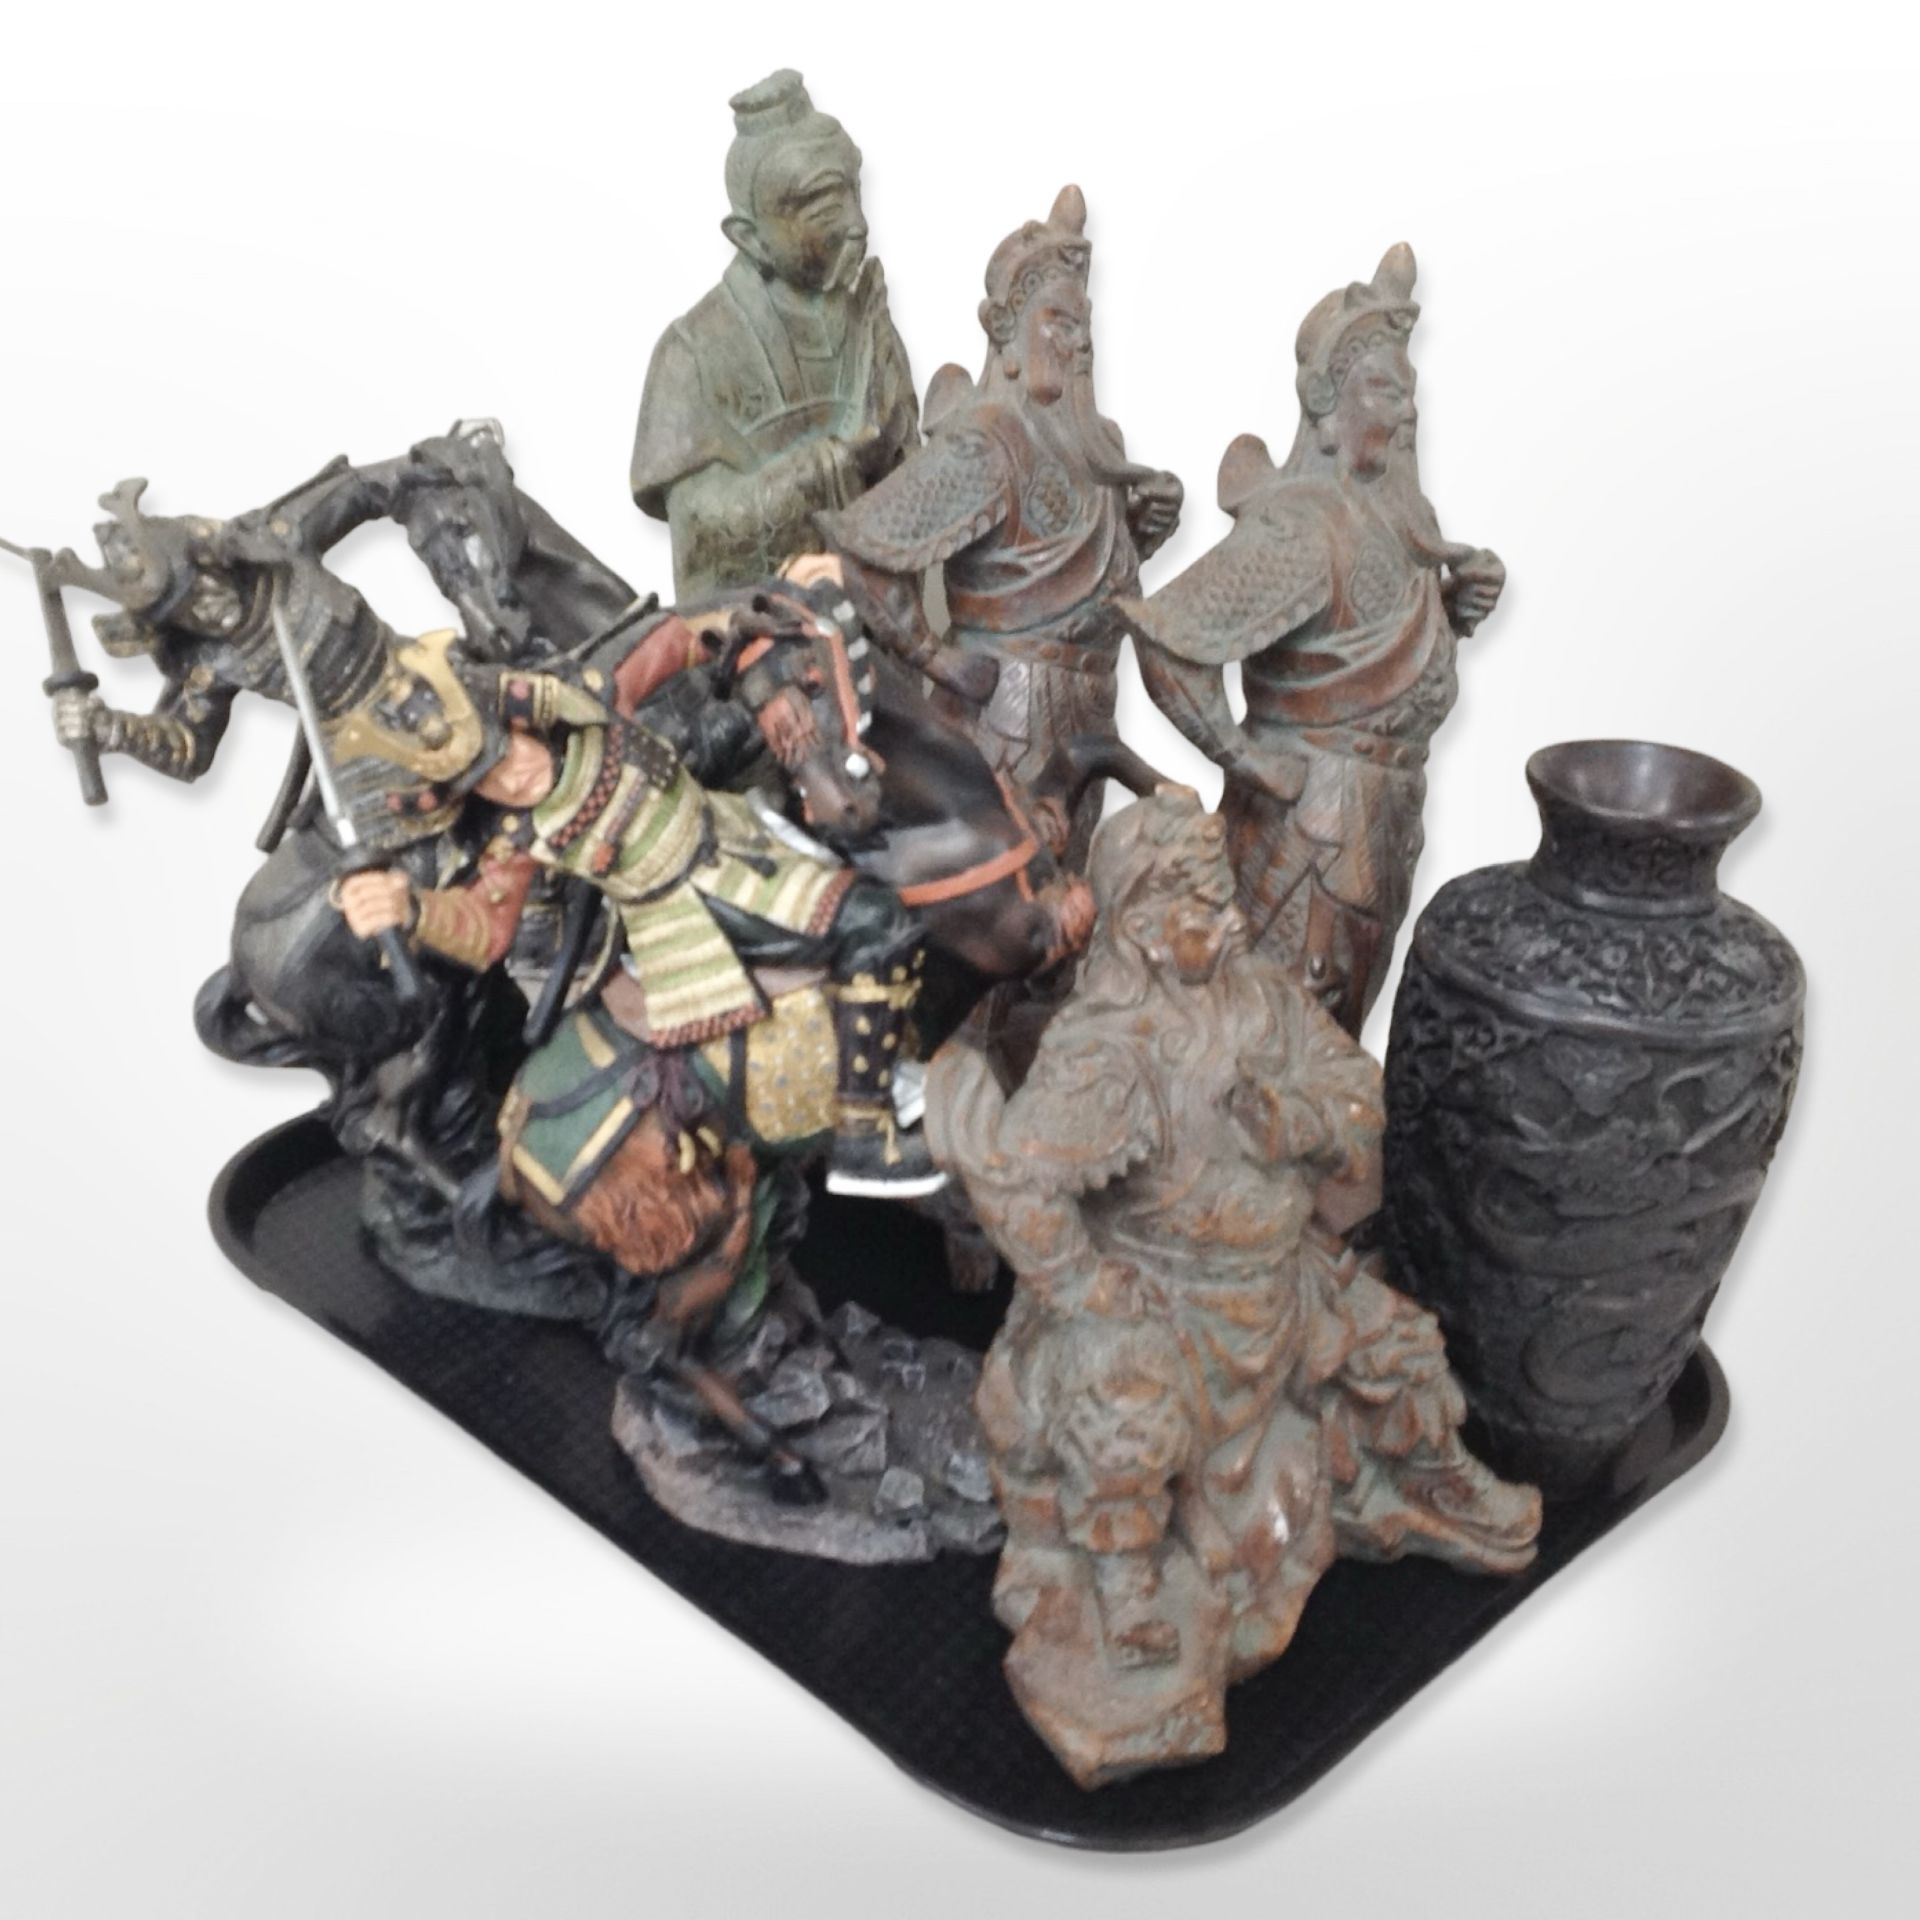 A group of oriental cast-resin figures of Chinese warriors and samurai on horseback,